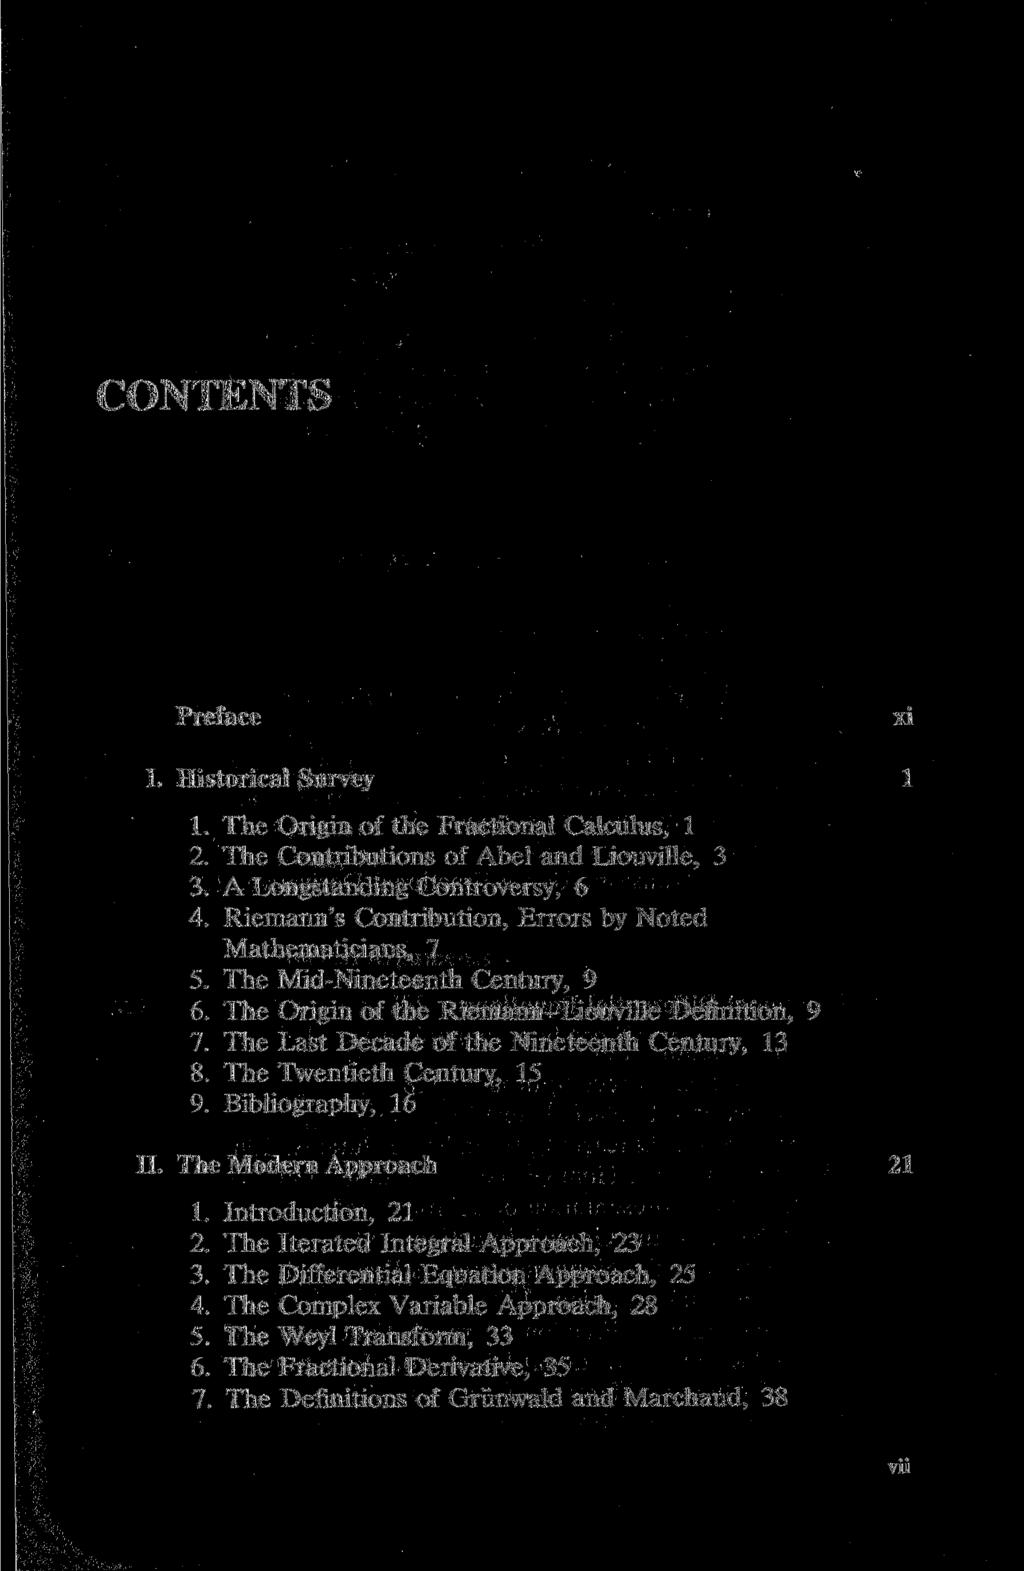 CONTENTS Preface I. Historical Survey 1. The Origin of the Fractional Calculus, 1 2. The Contributions of Abel and Liouville, 3 3. A Longstanding Controversy, 6 4.